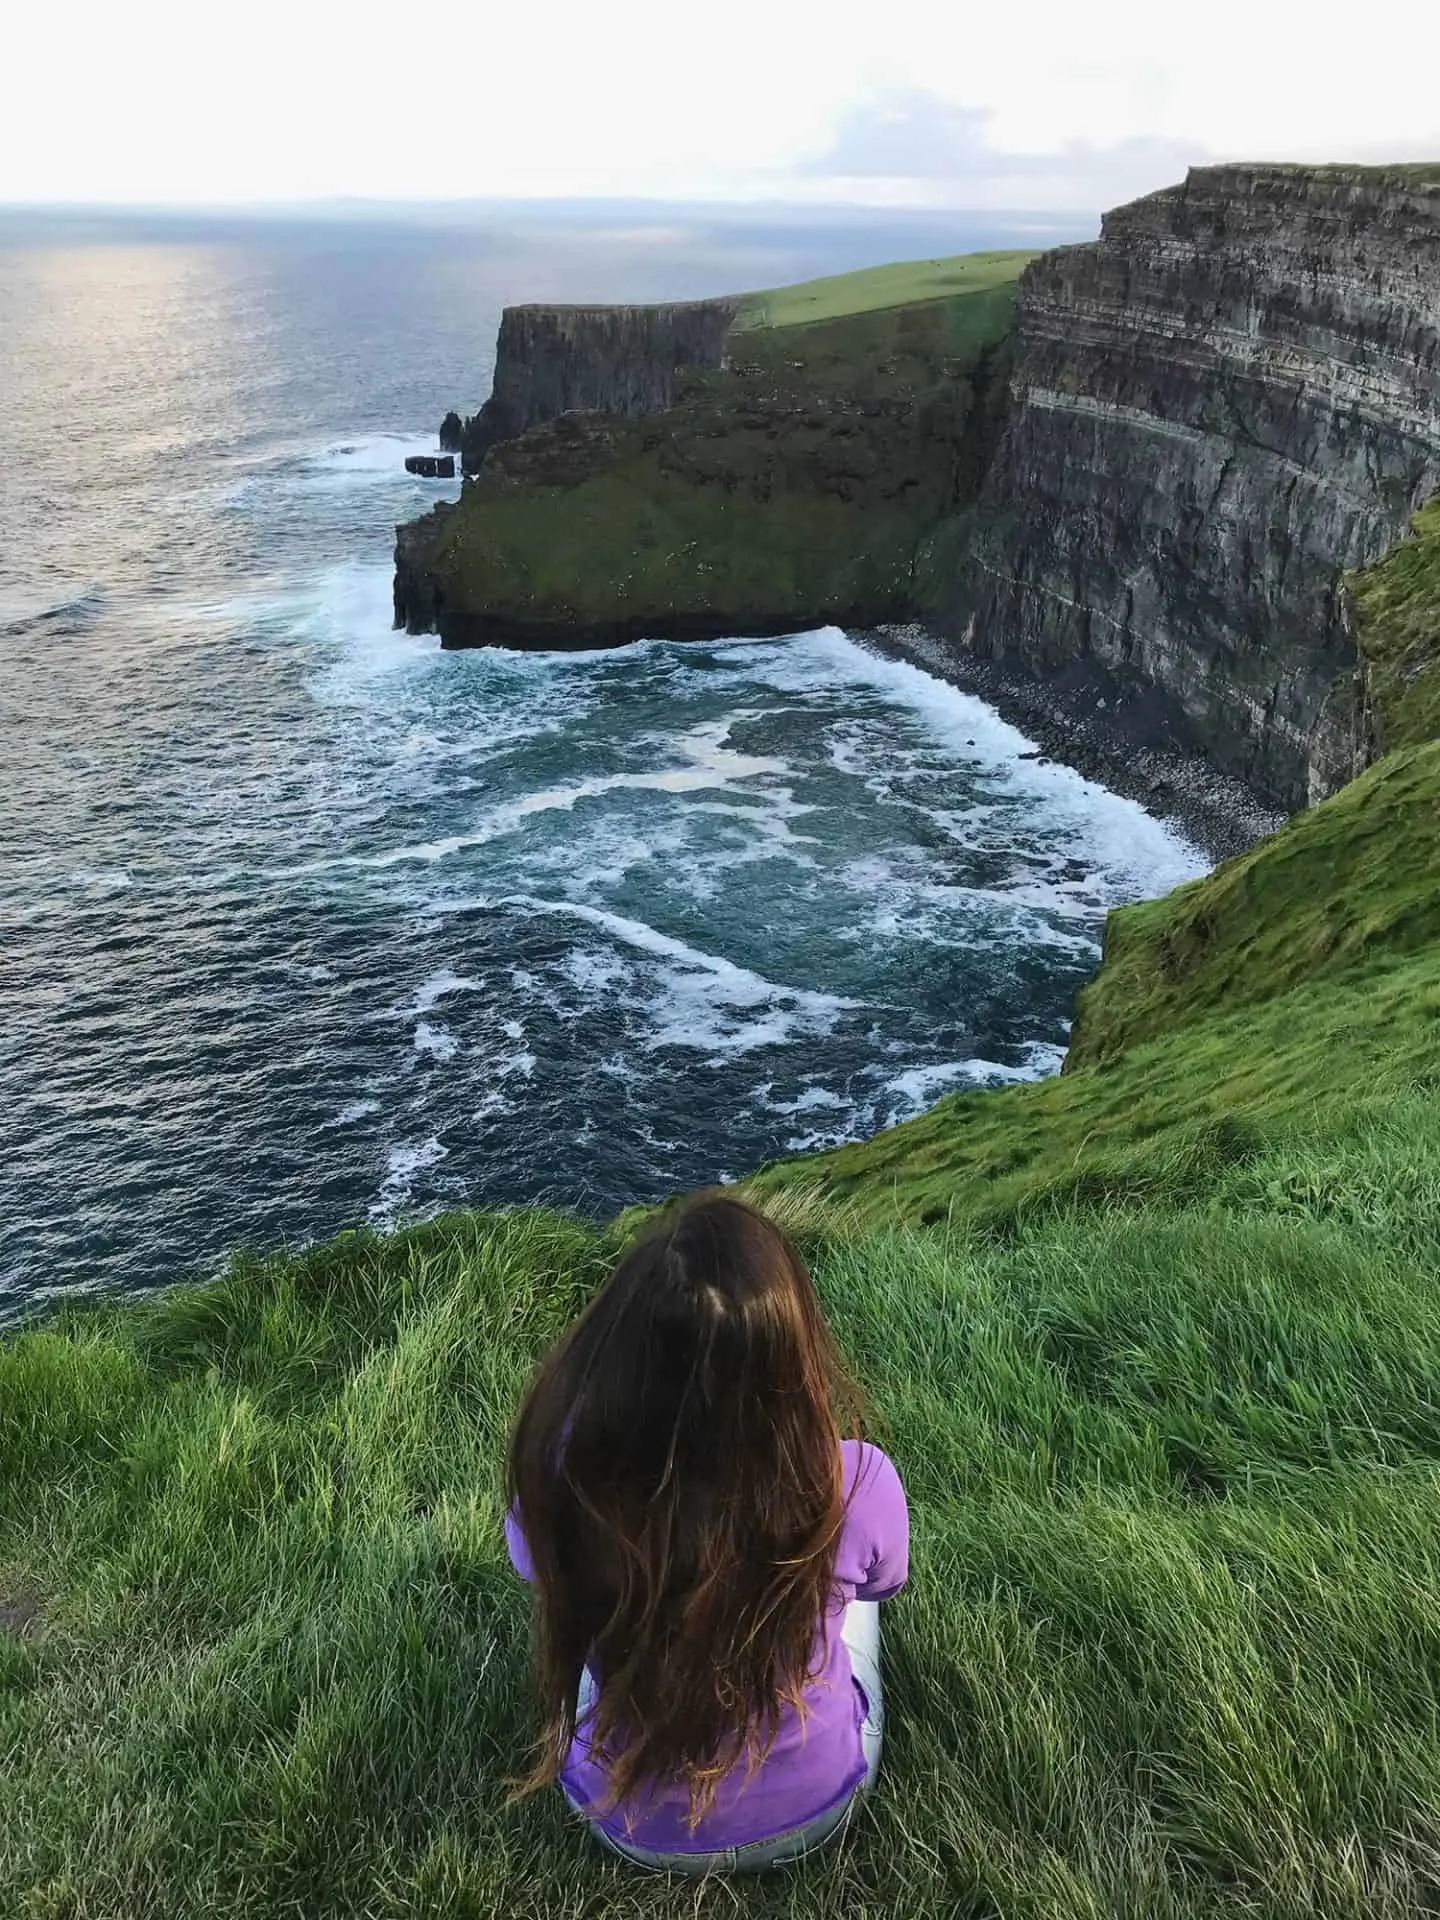 The Cliffs of Moher is one of the most iconic stops for your 2 week Ireland road trip itinerary